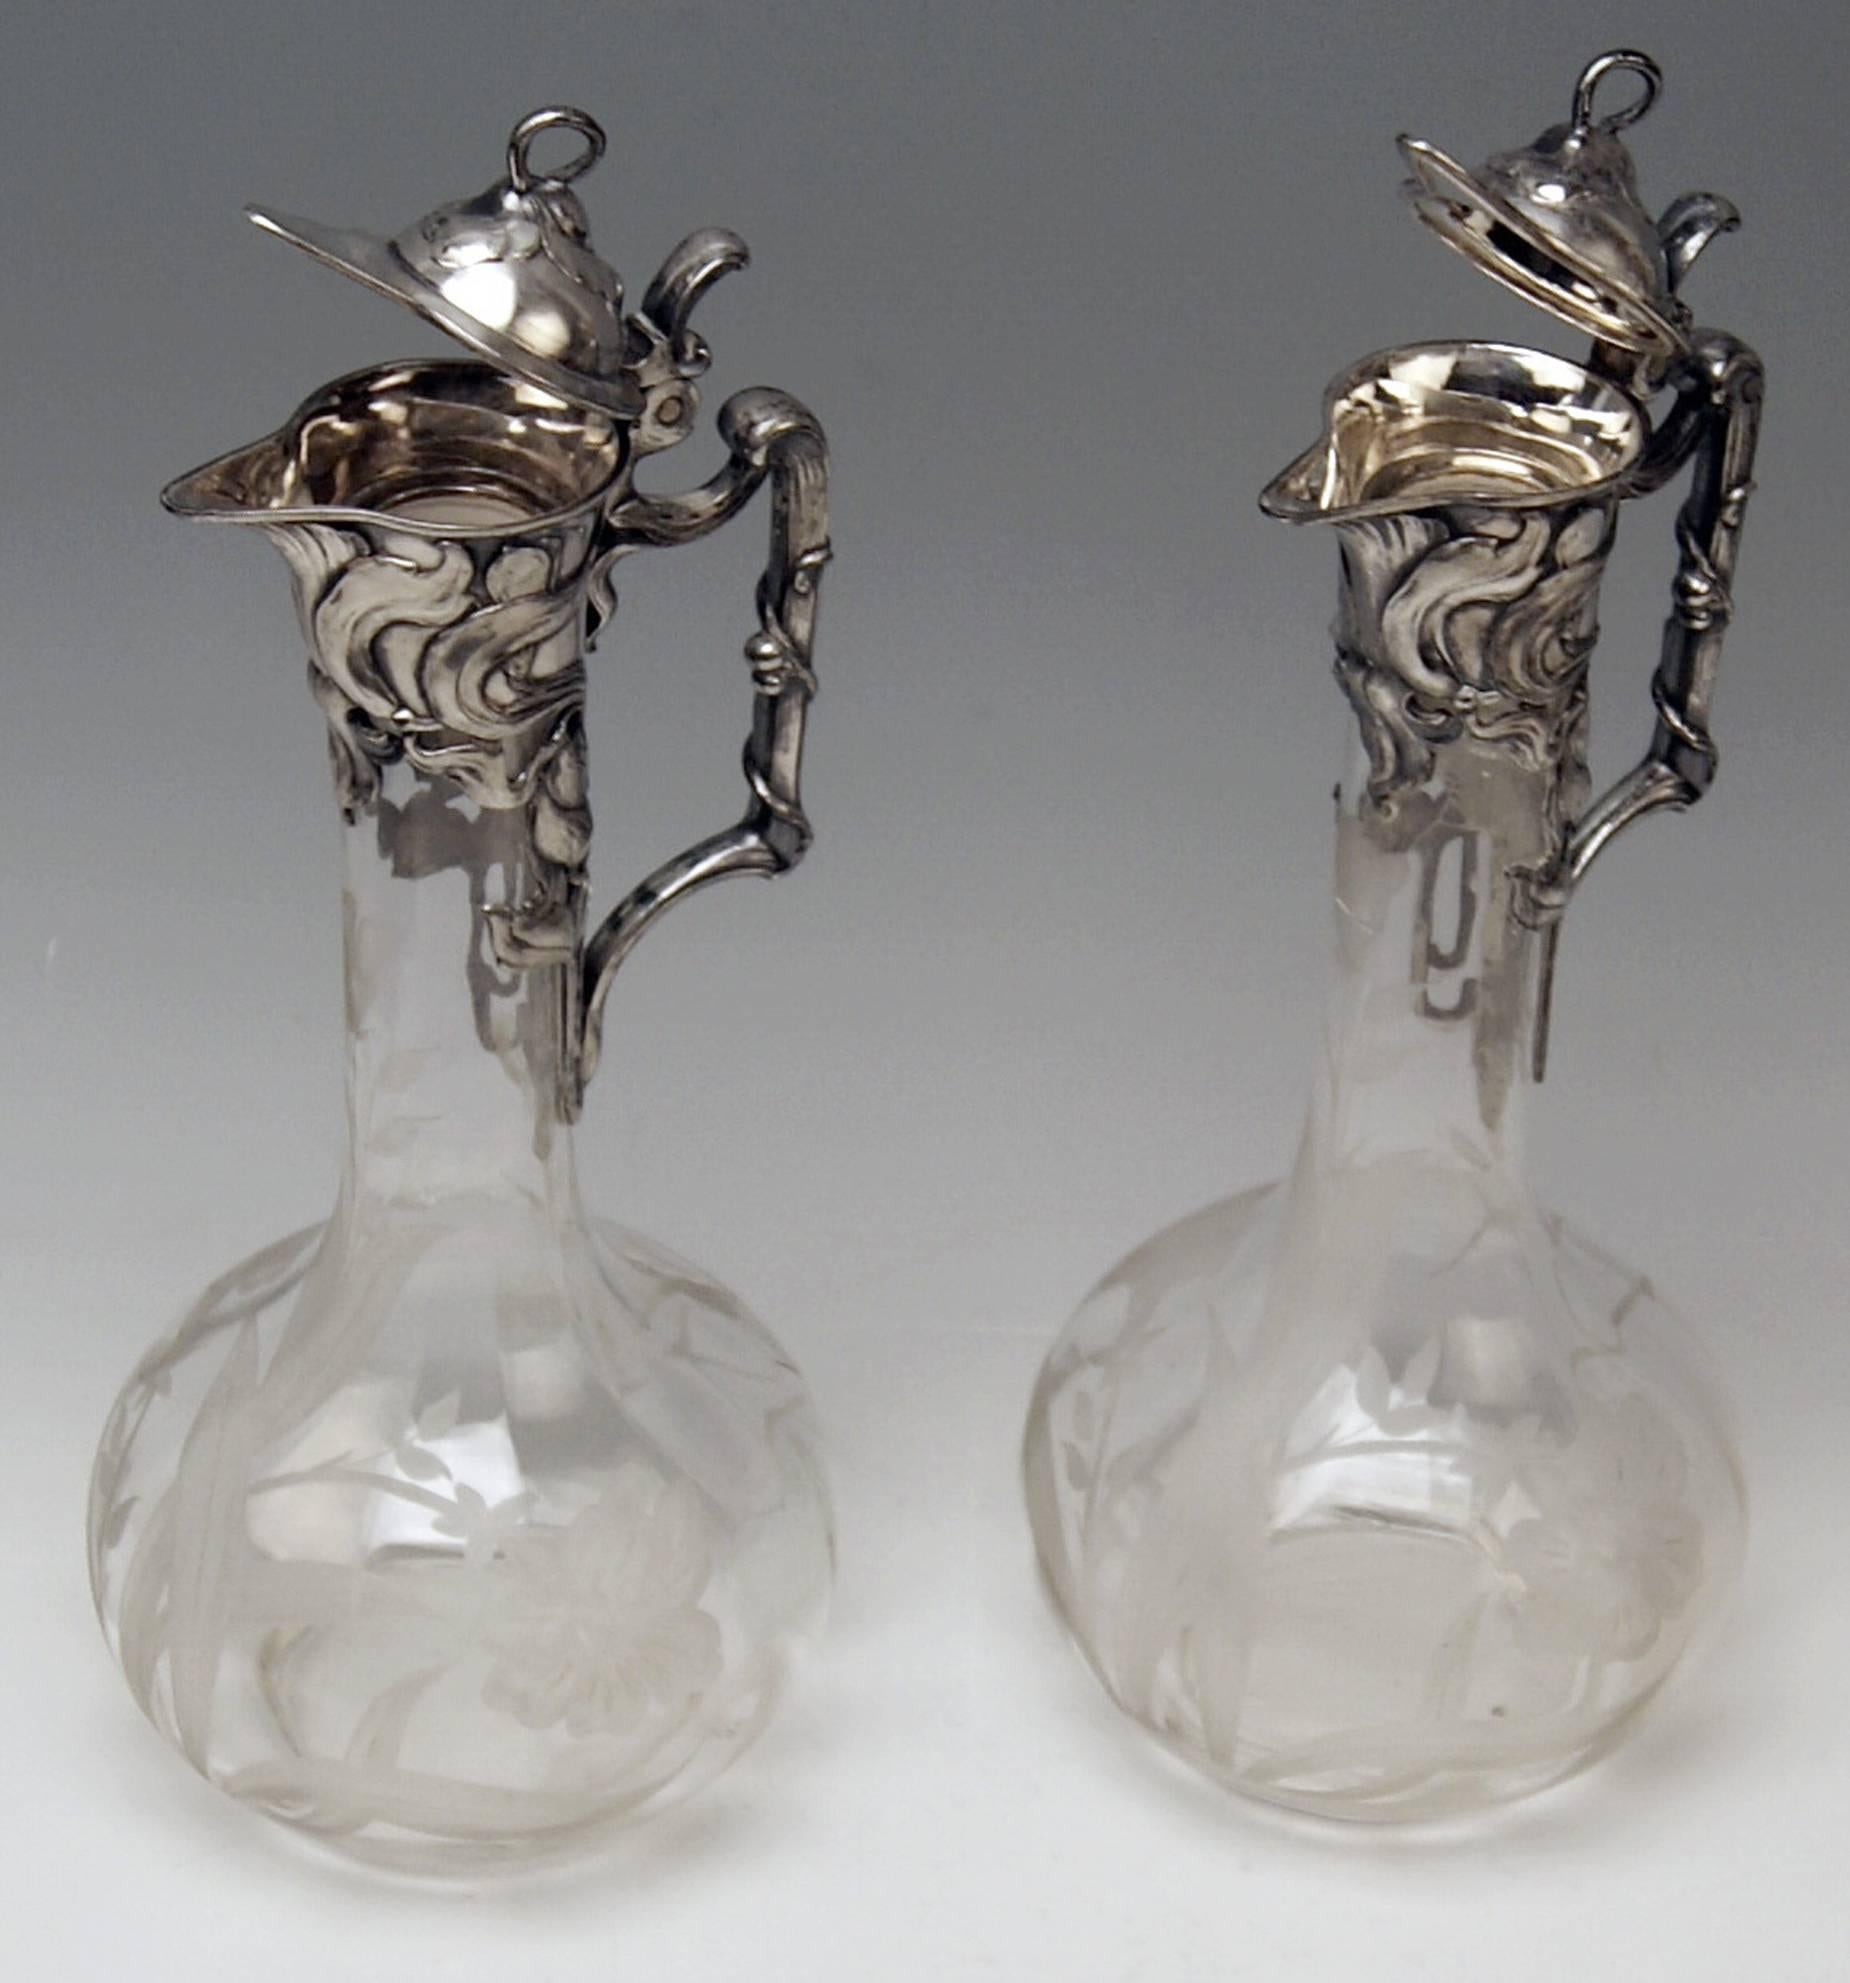 Early 20th Century WMF Pair of Claret Water Jugs Silver Plated Art Nouveau Germany, circa 1905